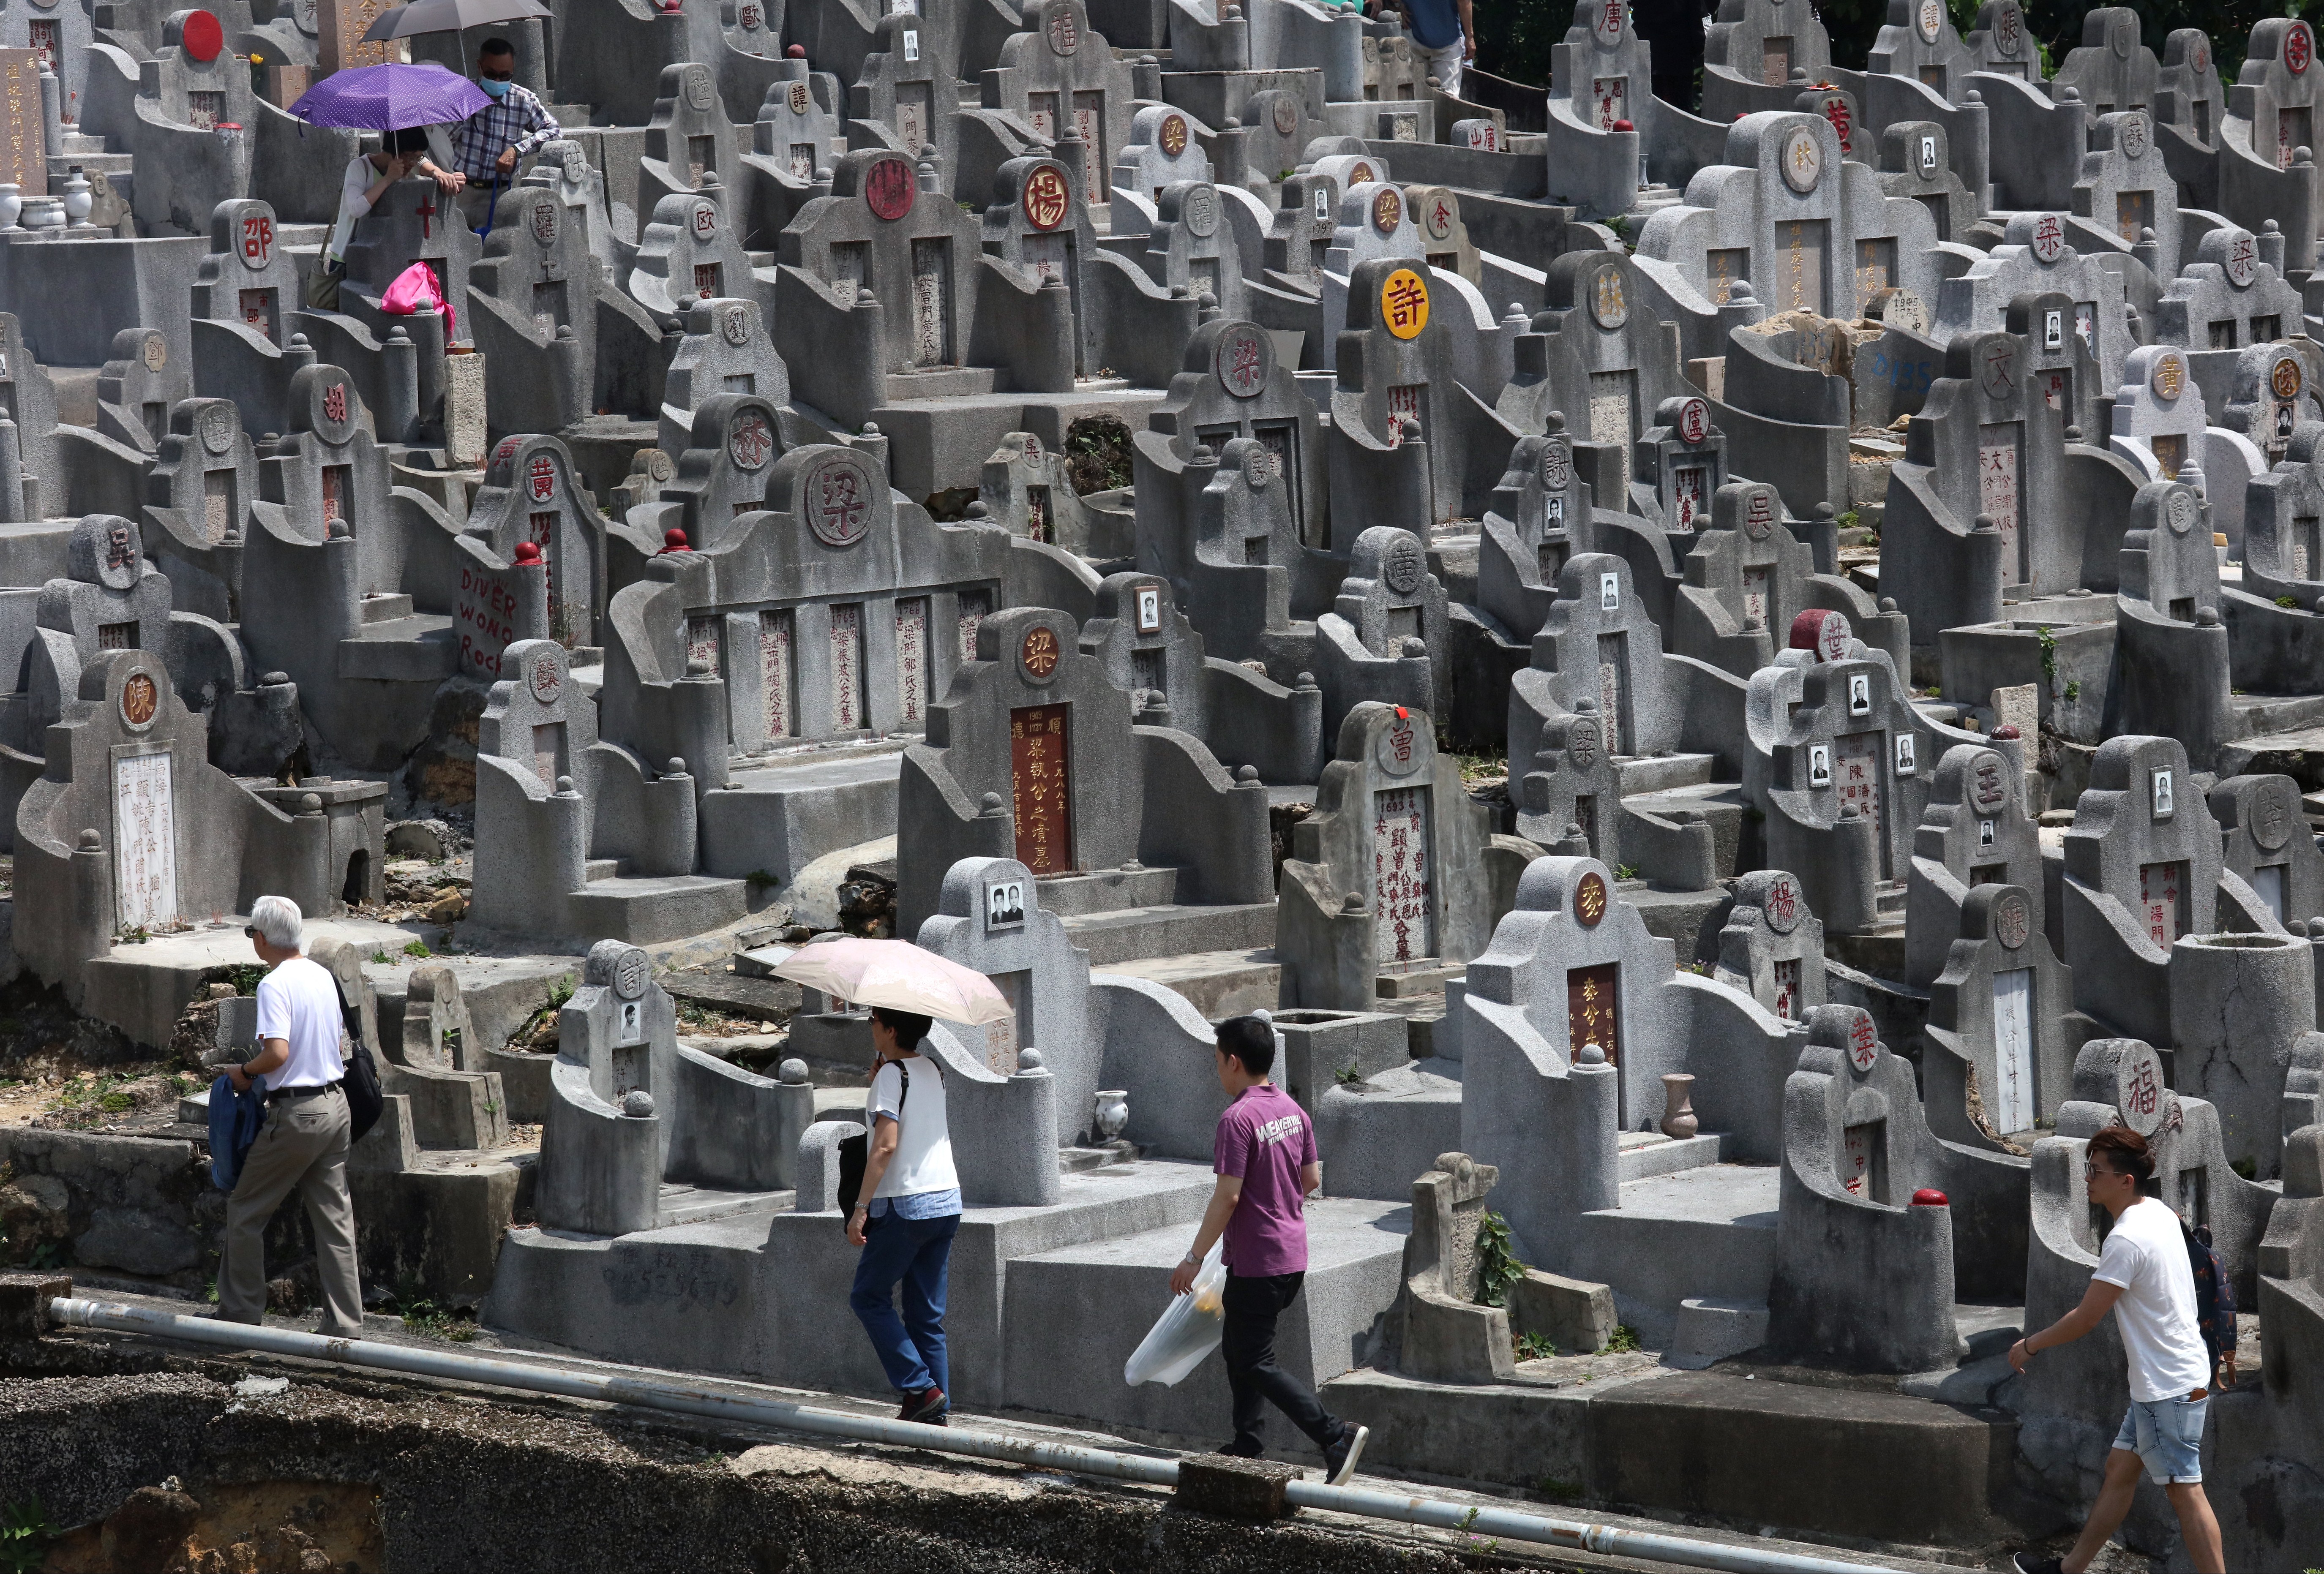 Obtaining a place at one of Hong Kong’s cemeteries can take years and cost thousands of dollars. Photo: Felix Wong